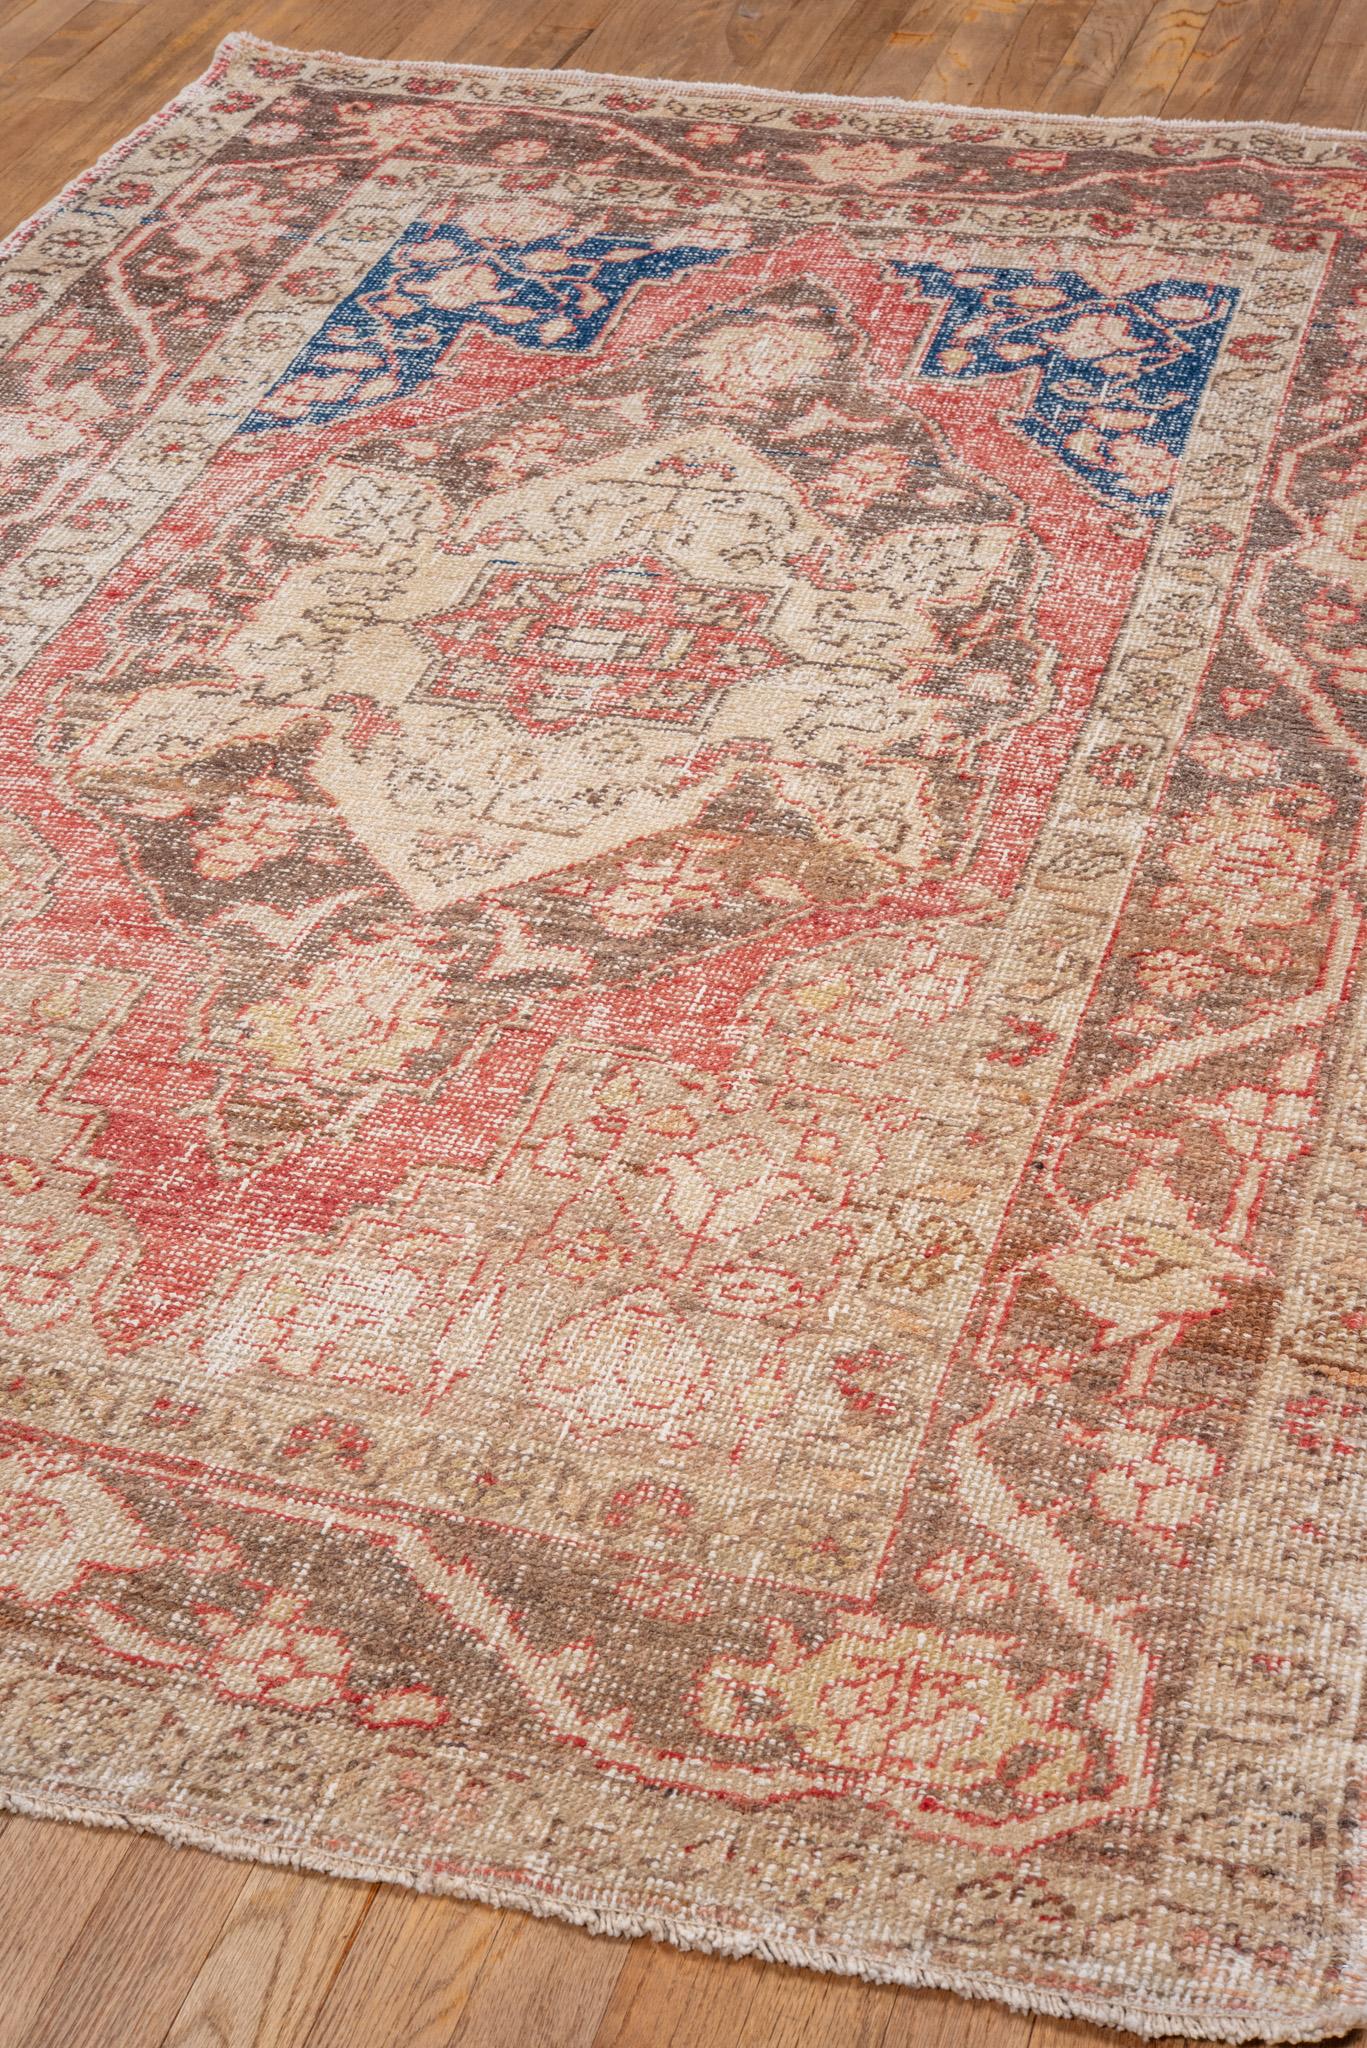 An Oushak Rug circa 1920. Handknotted with 100% wool yarn.